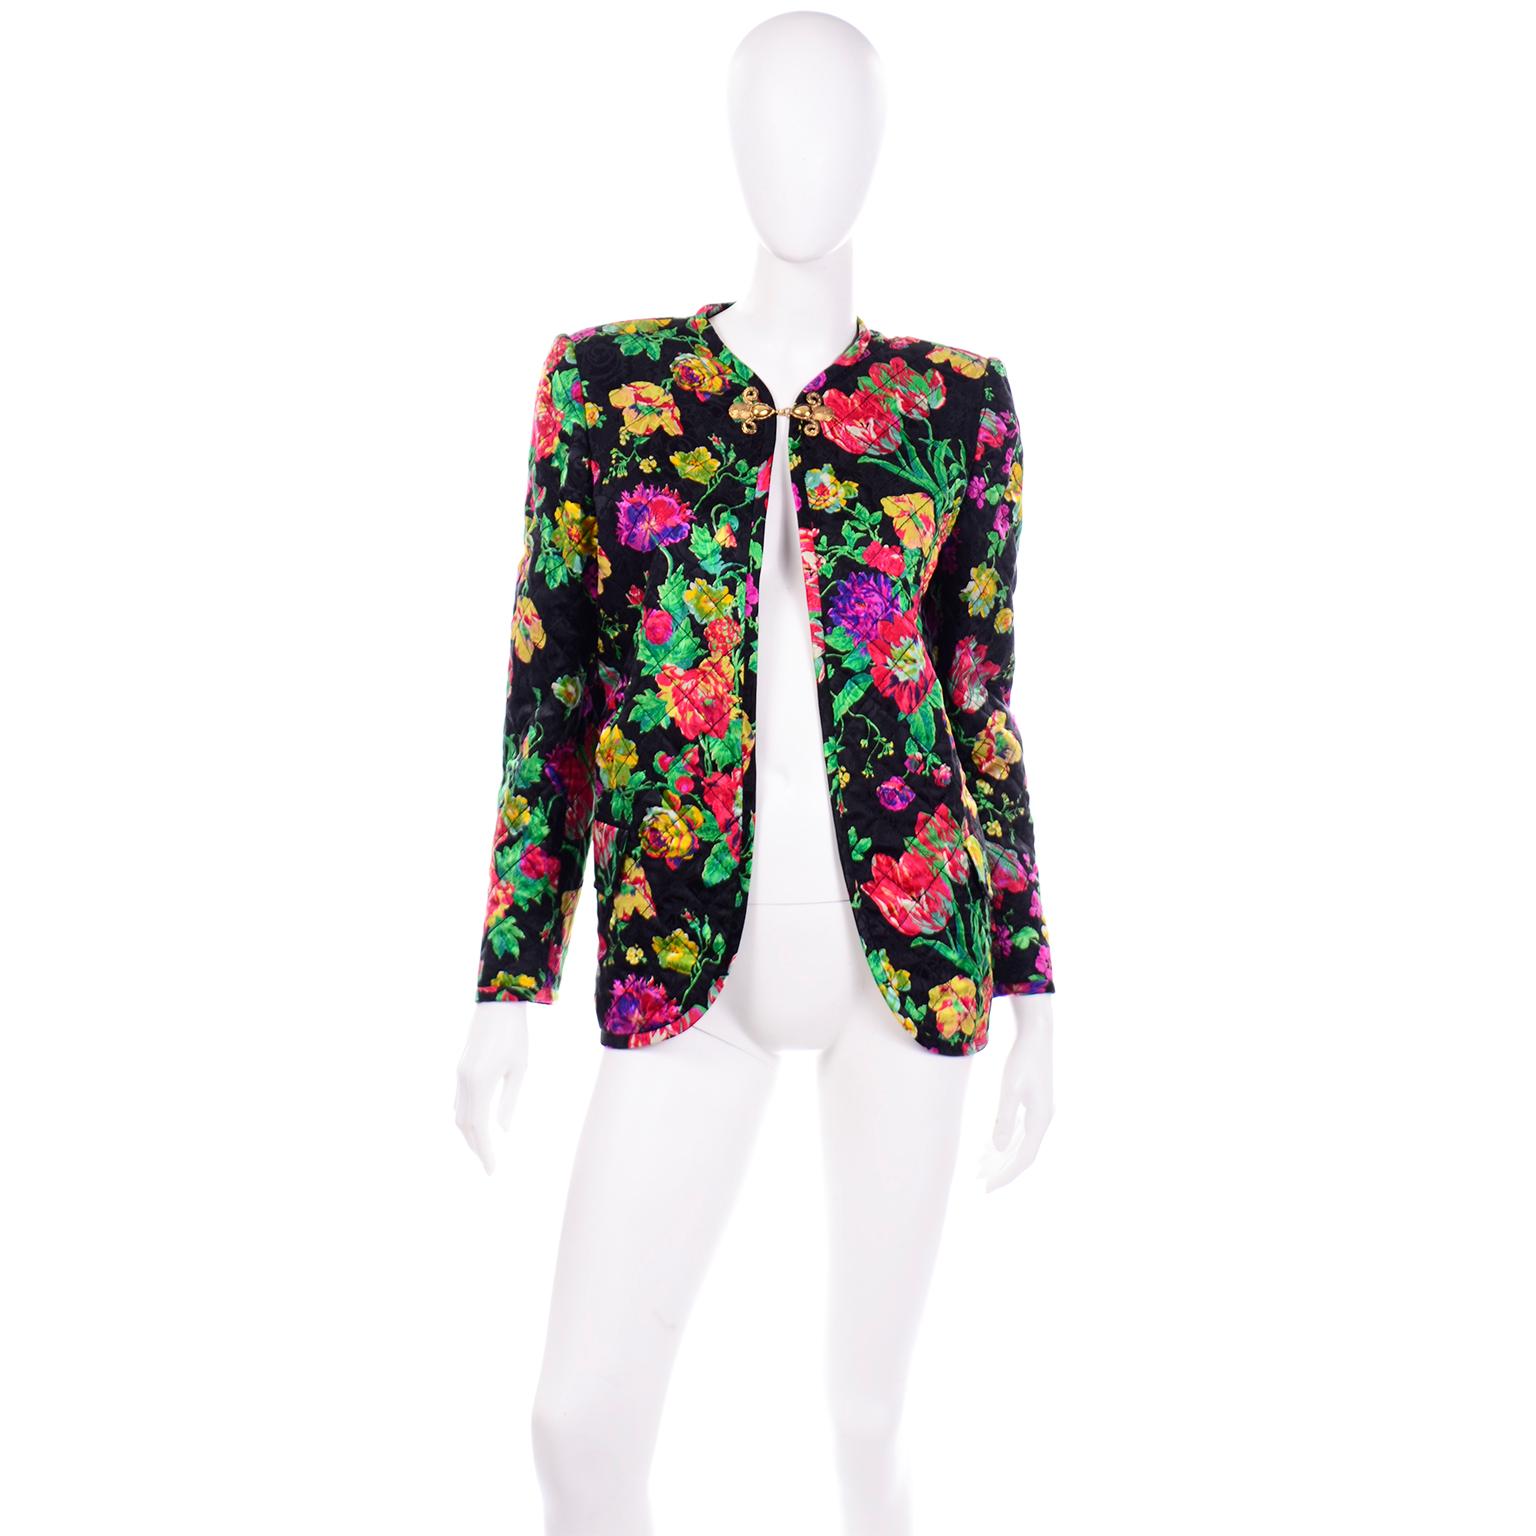 This is a gorgeous vintage deadstock Emanuel Ungaro quilted floral silk jacket with a pretty gold tone hook closure. This colorful jacket is in black silk with bold flowers in vibrant shades of pink, red, purple, green, yellow, violet, mint, and